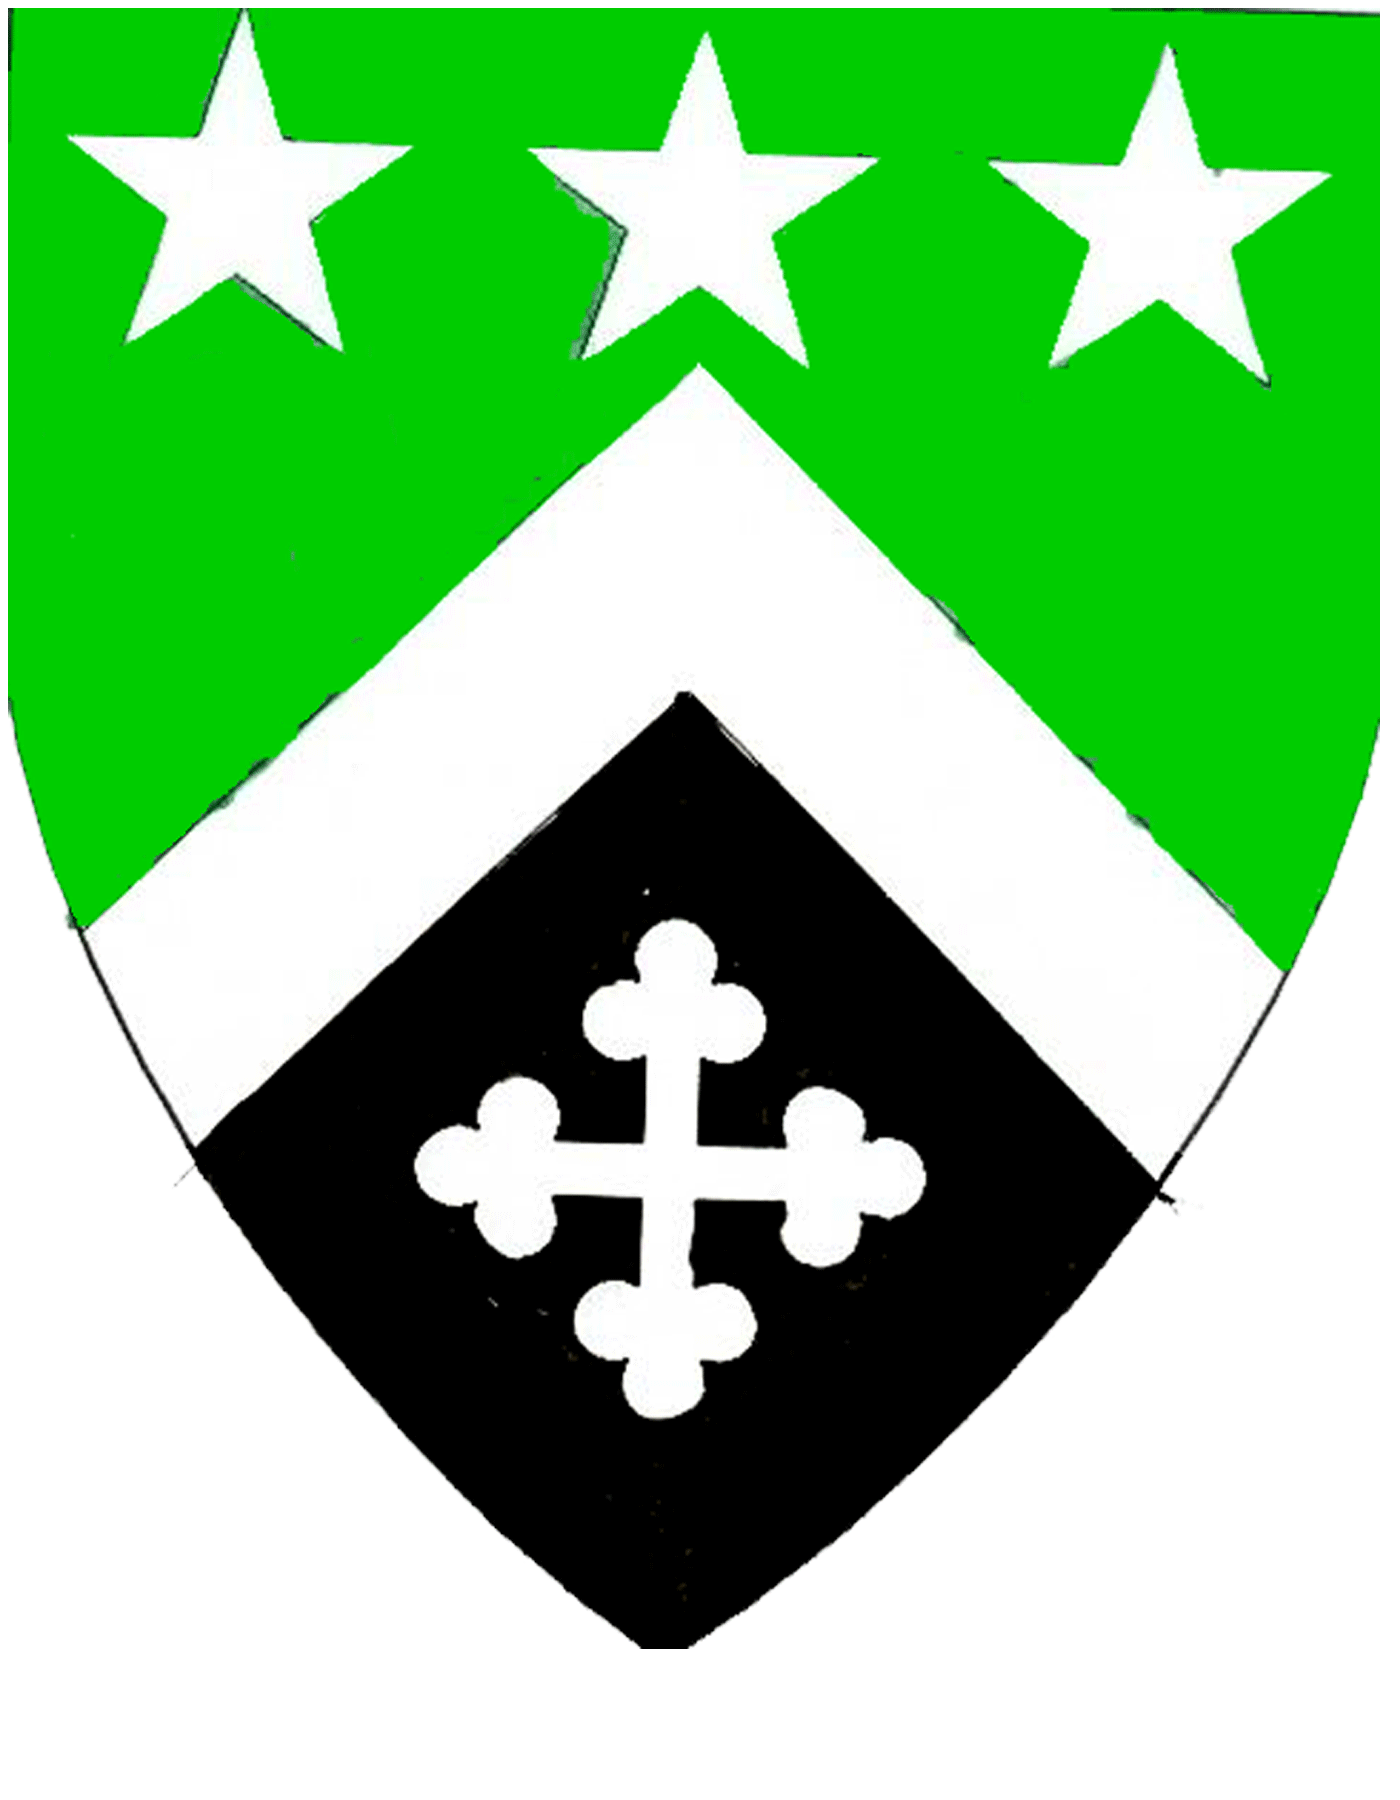 The arms of Jean-Christophe Messier